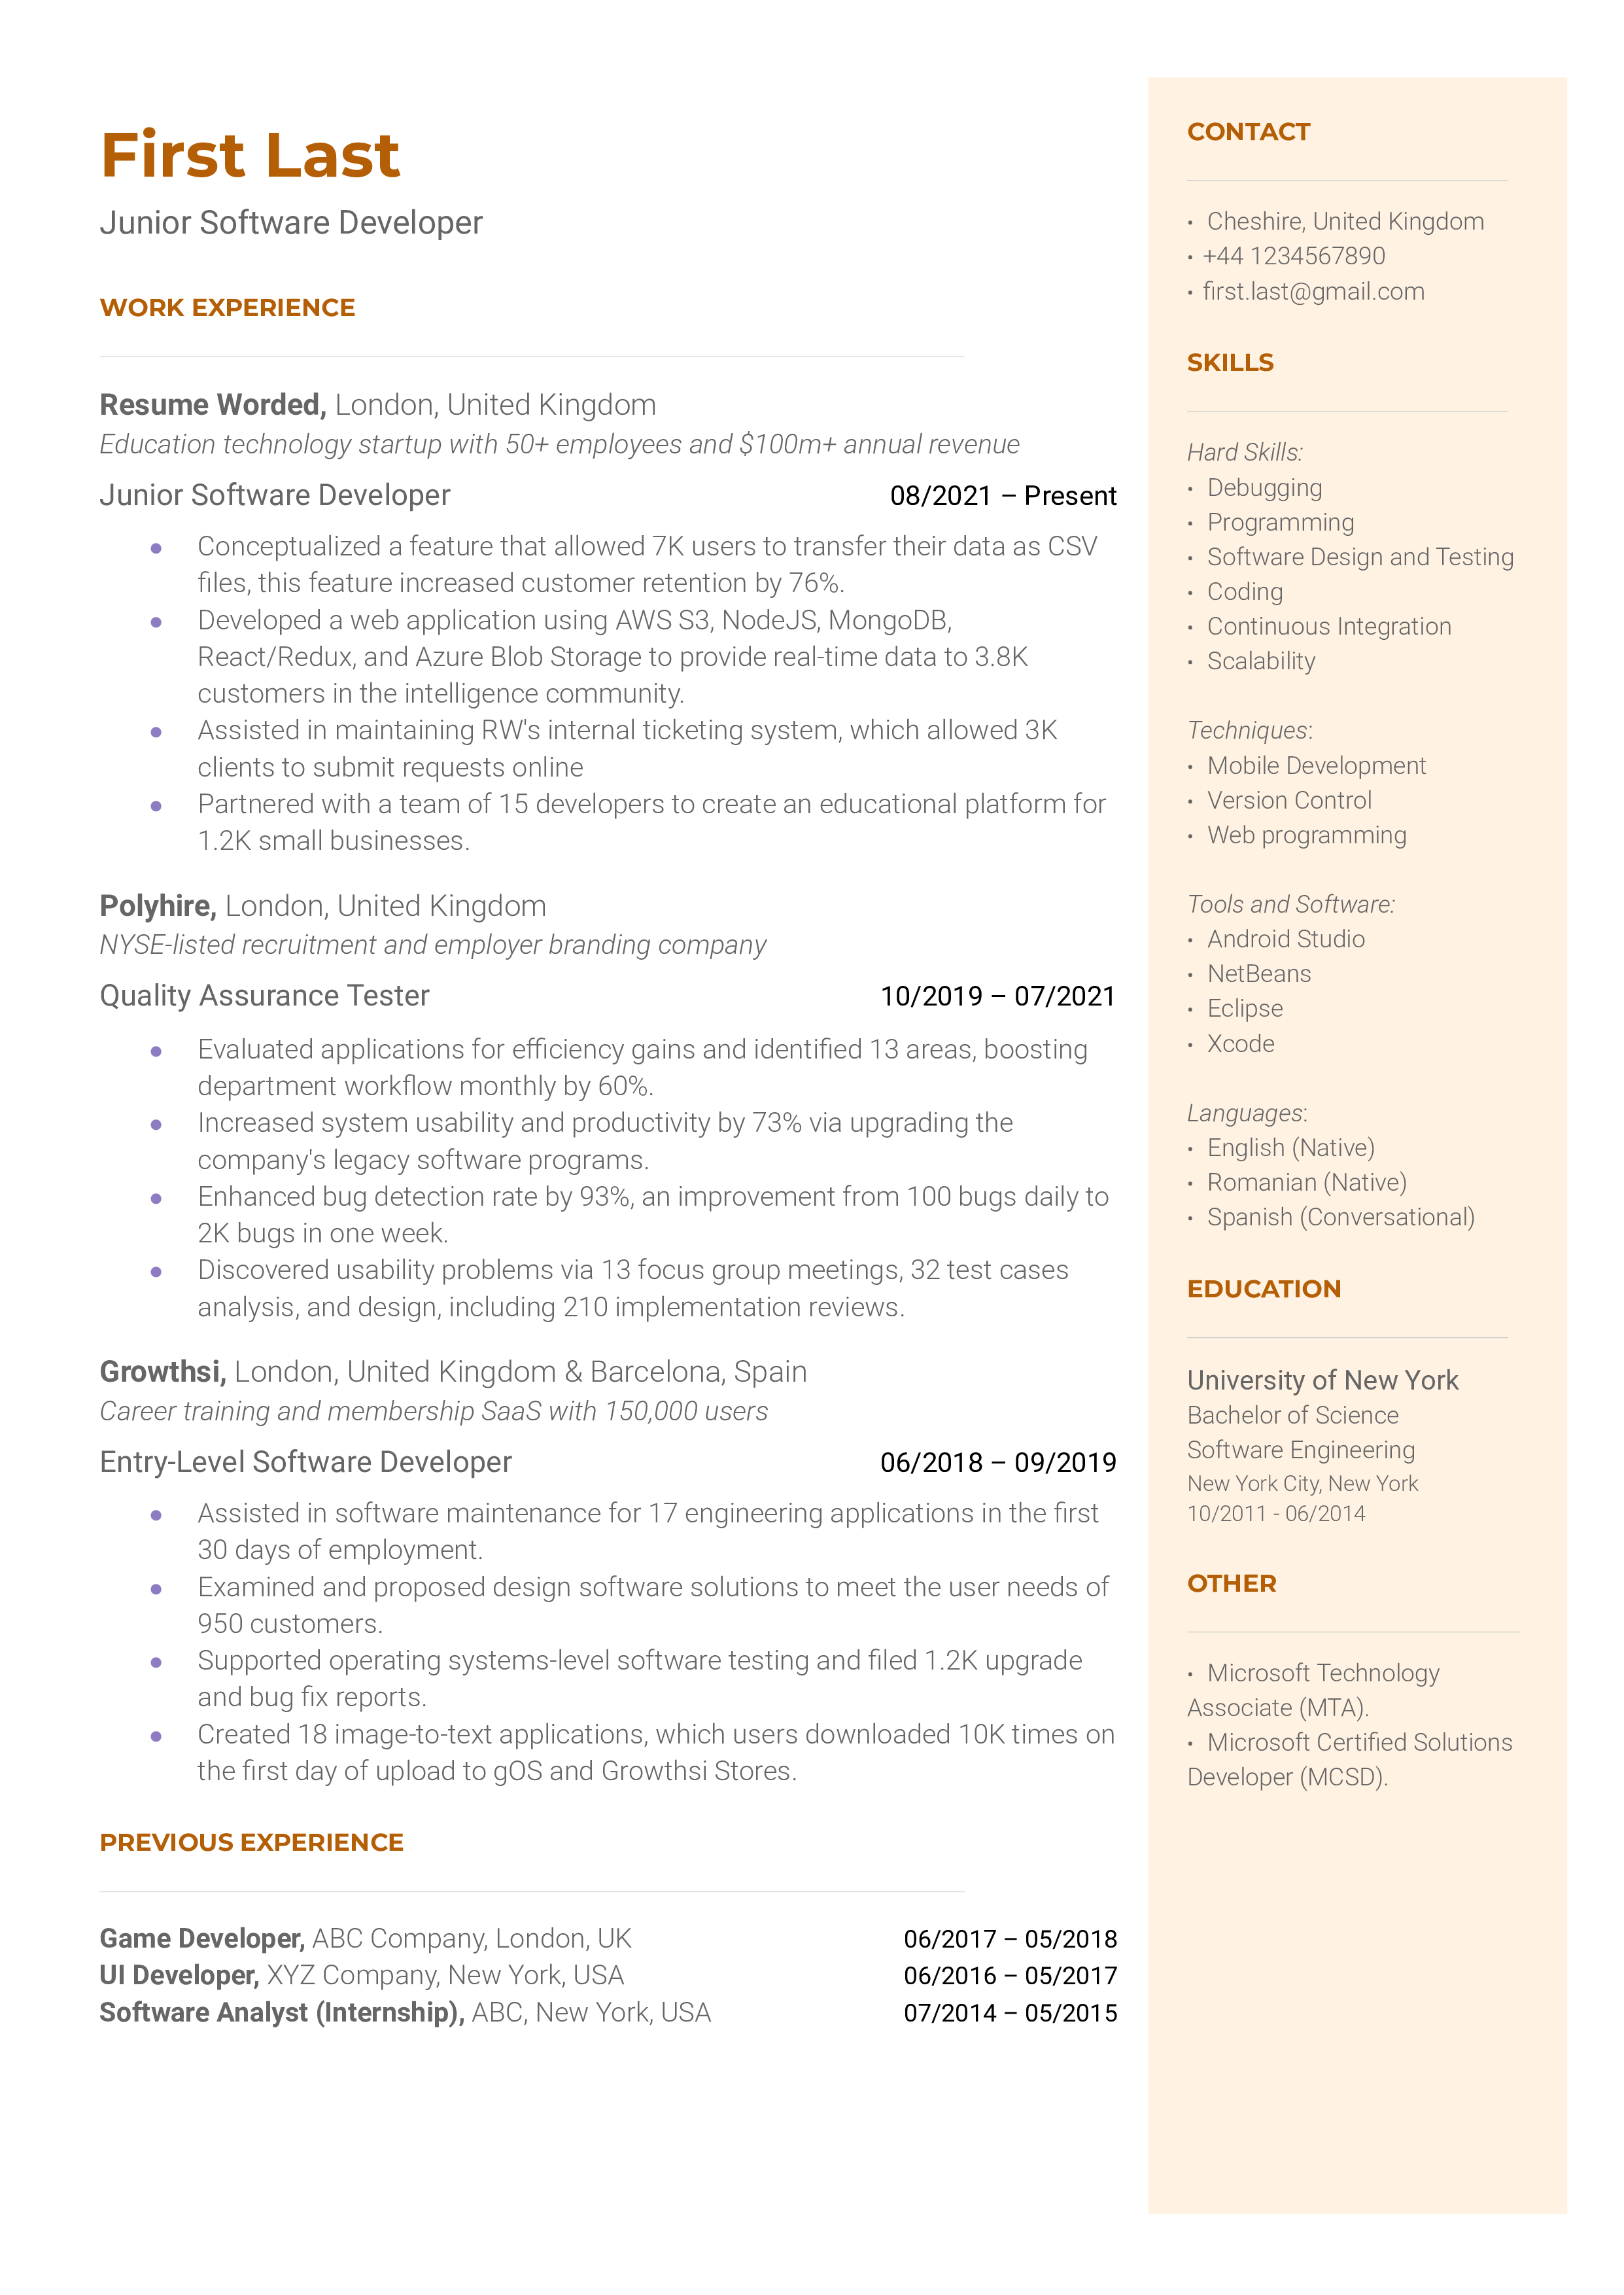 A junior software developer's CV showcasing technical skills and project experiences.